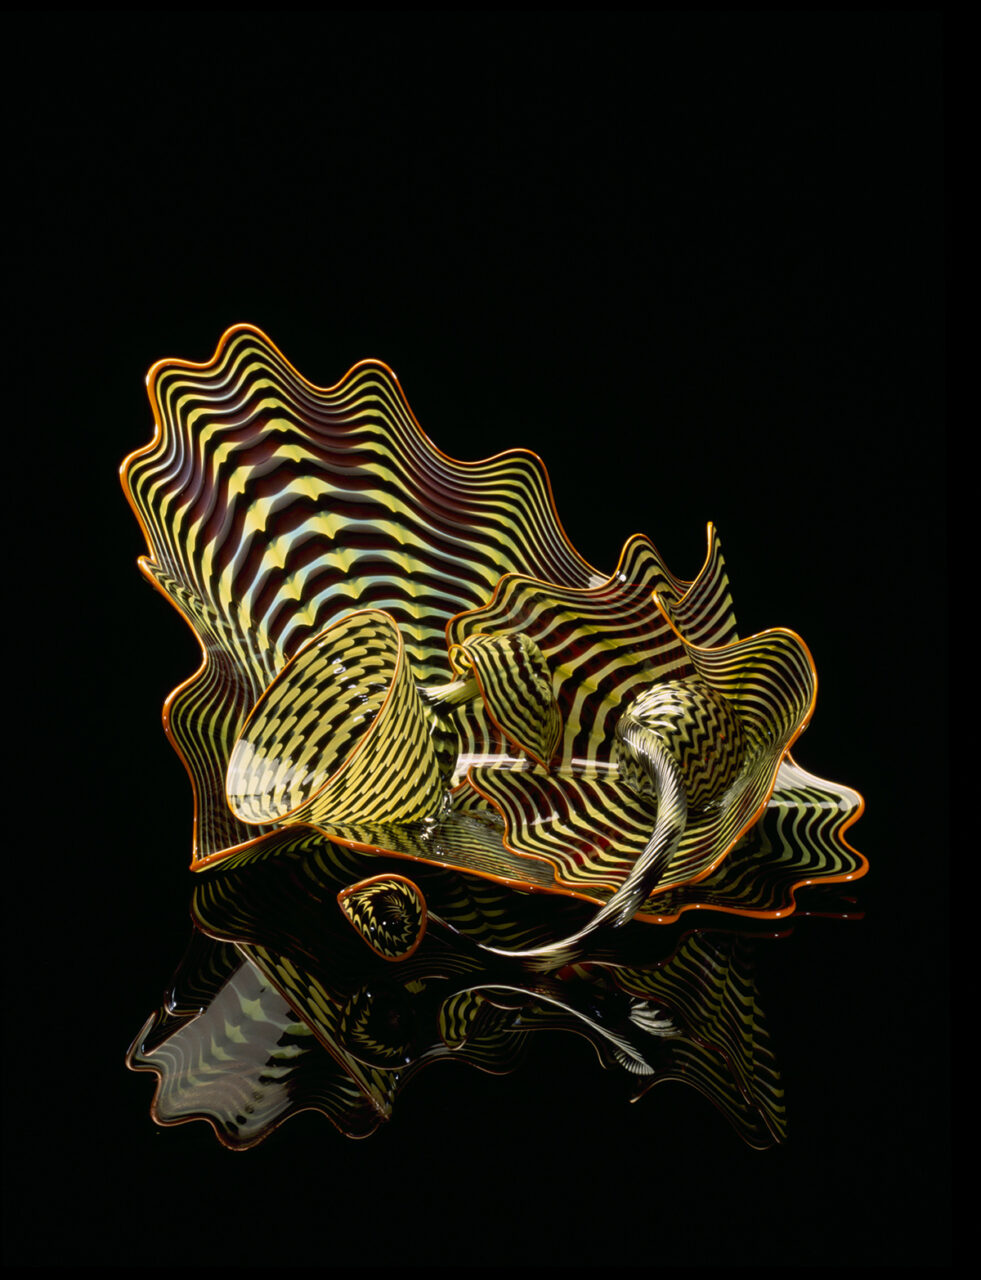 Dale Chihuly | Sandra Ainsley Gallery